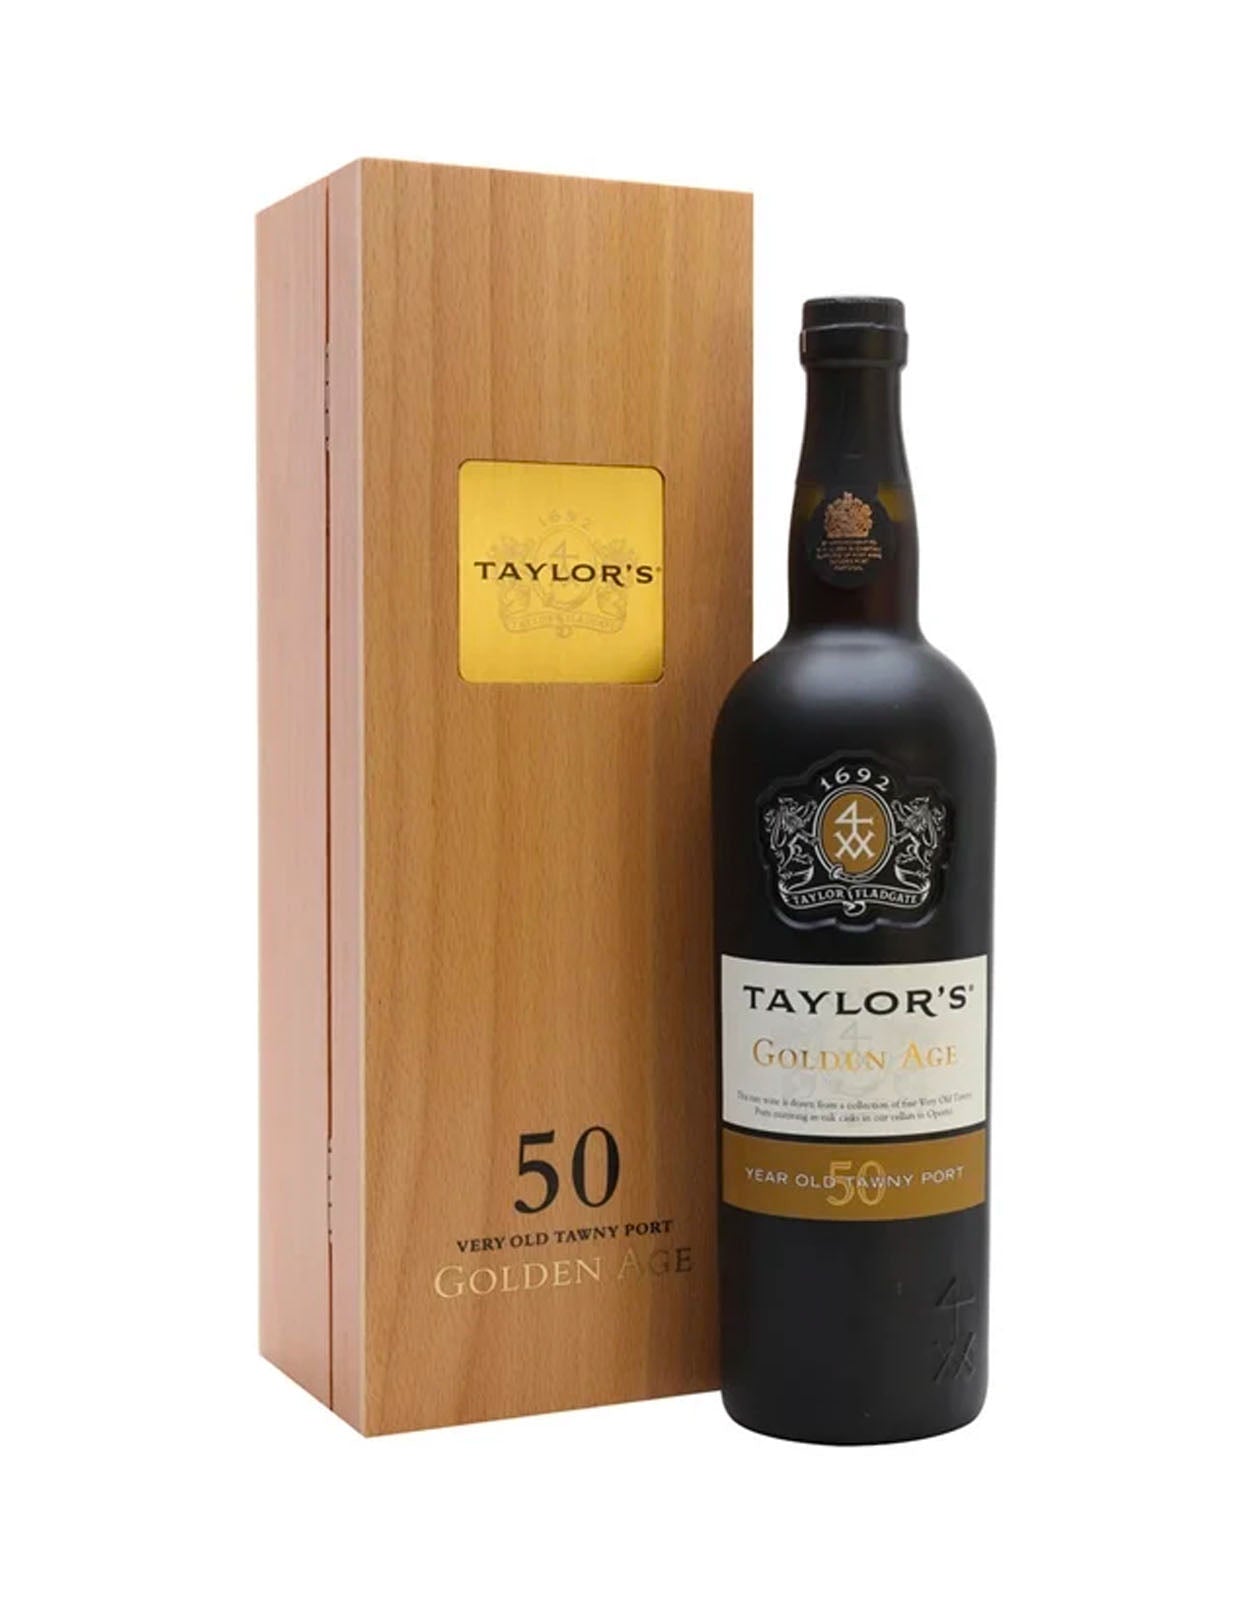 Taylor Fladgate 50 Year Old Tawny Port "Golden Age"